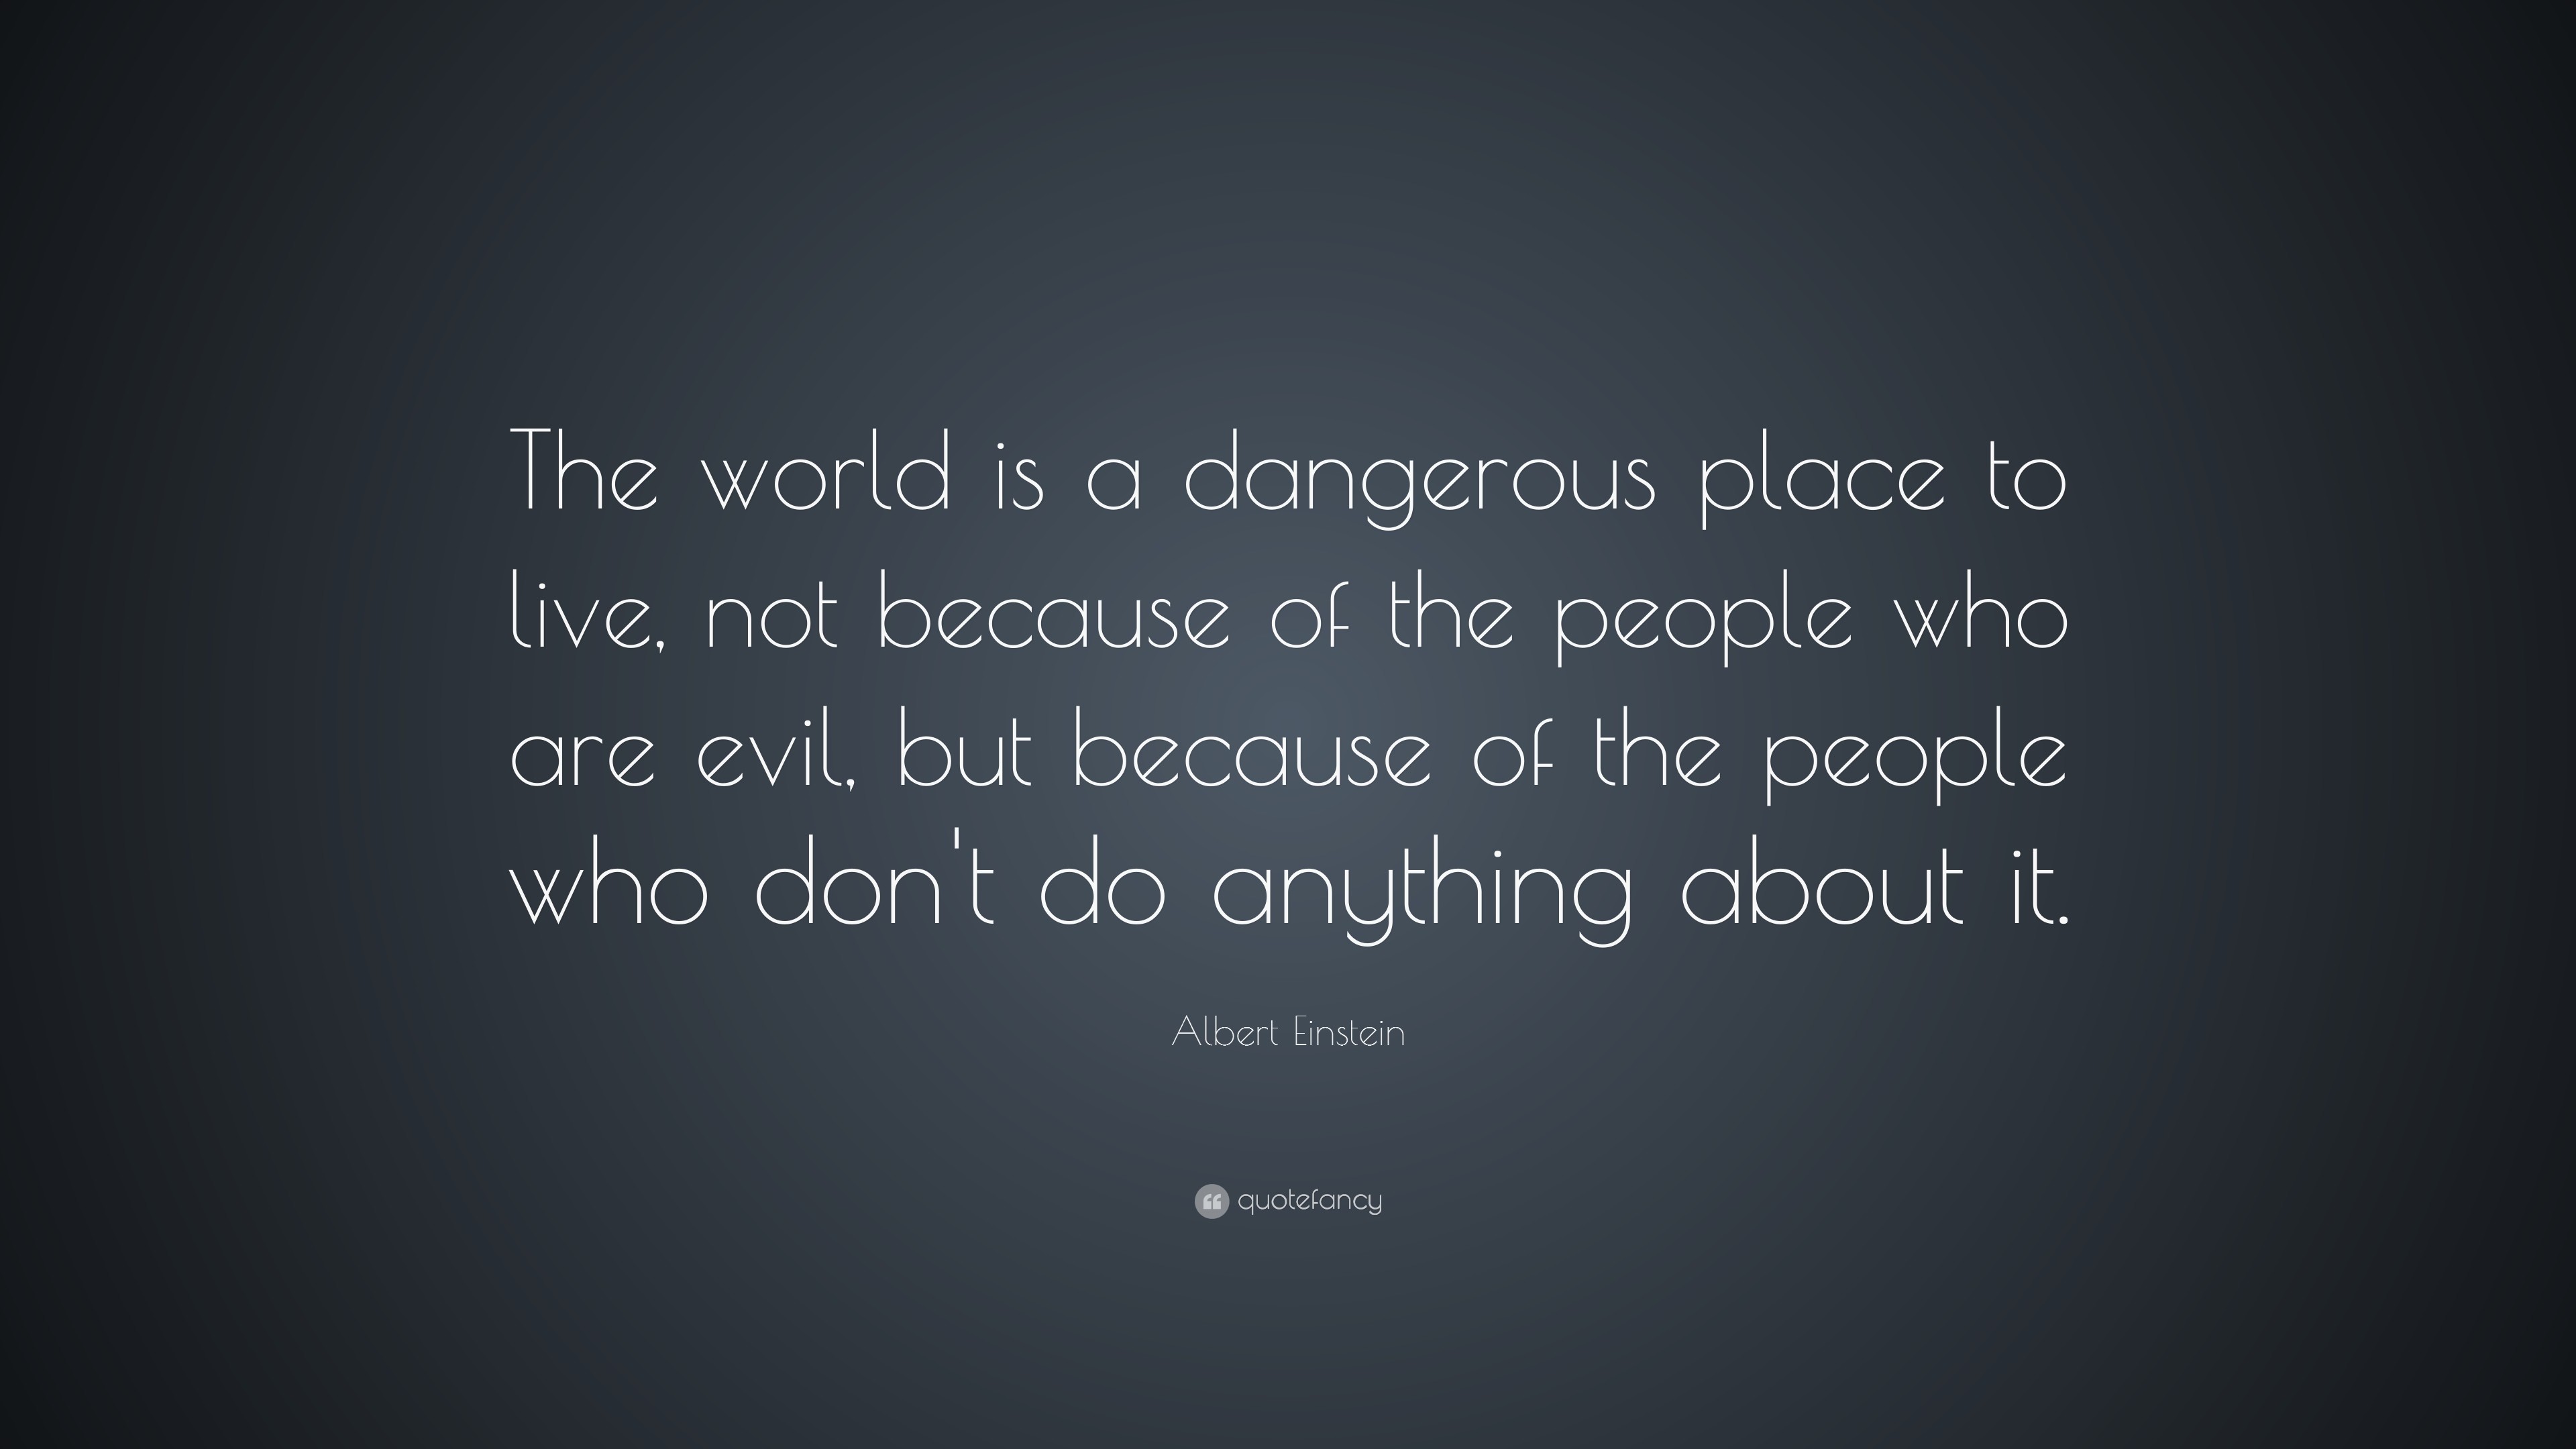 3840x2160 Albert Einstein Quote: “The world is a dangerous place to live, not because